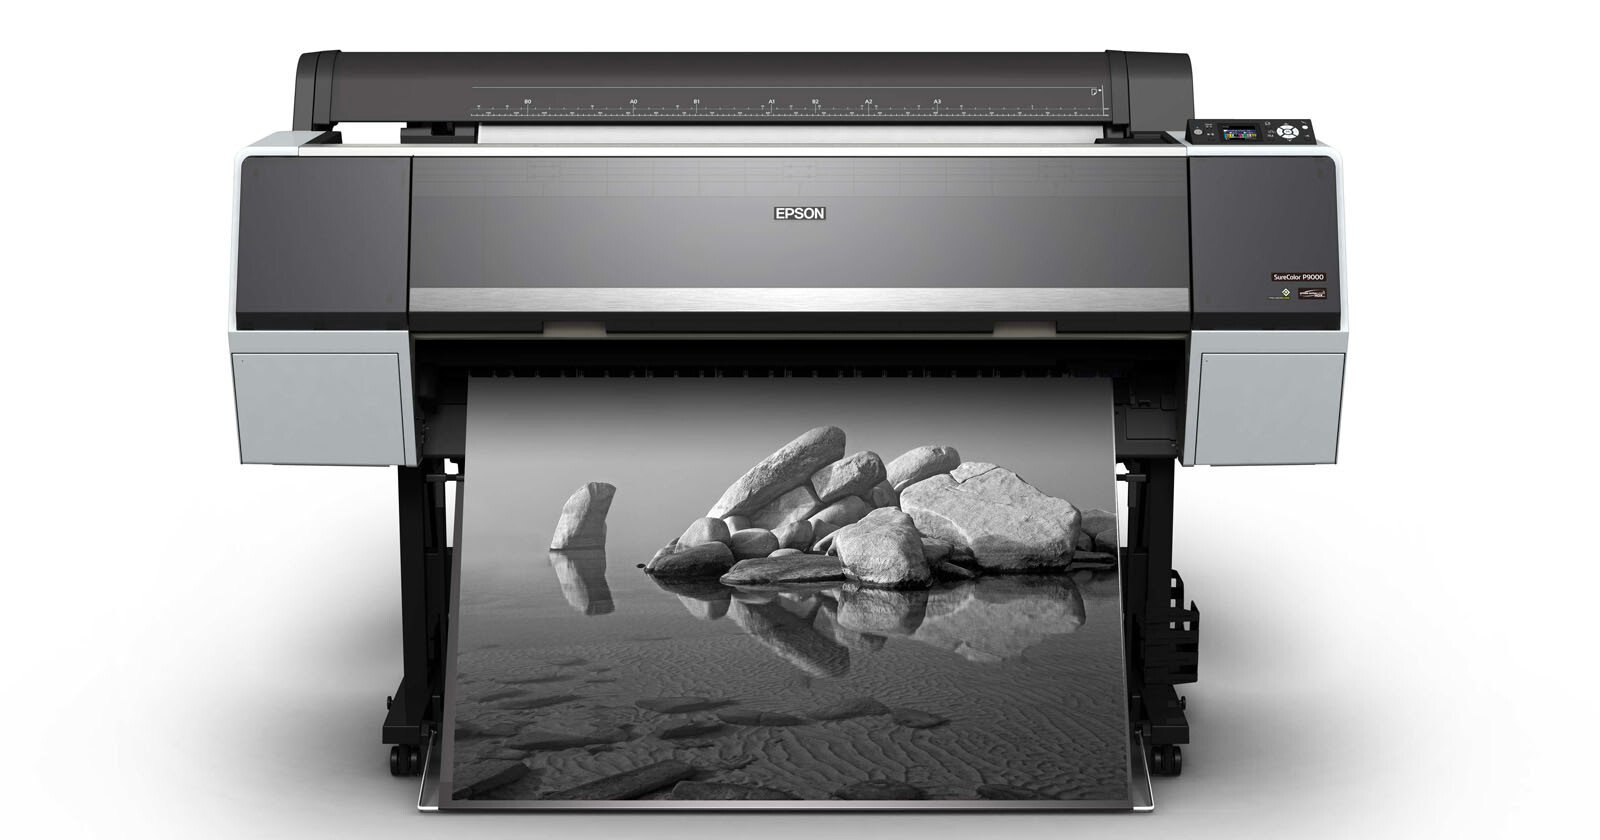 Popular Epson Photo Printers Must Be Updated, or New Ink Wont Work